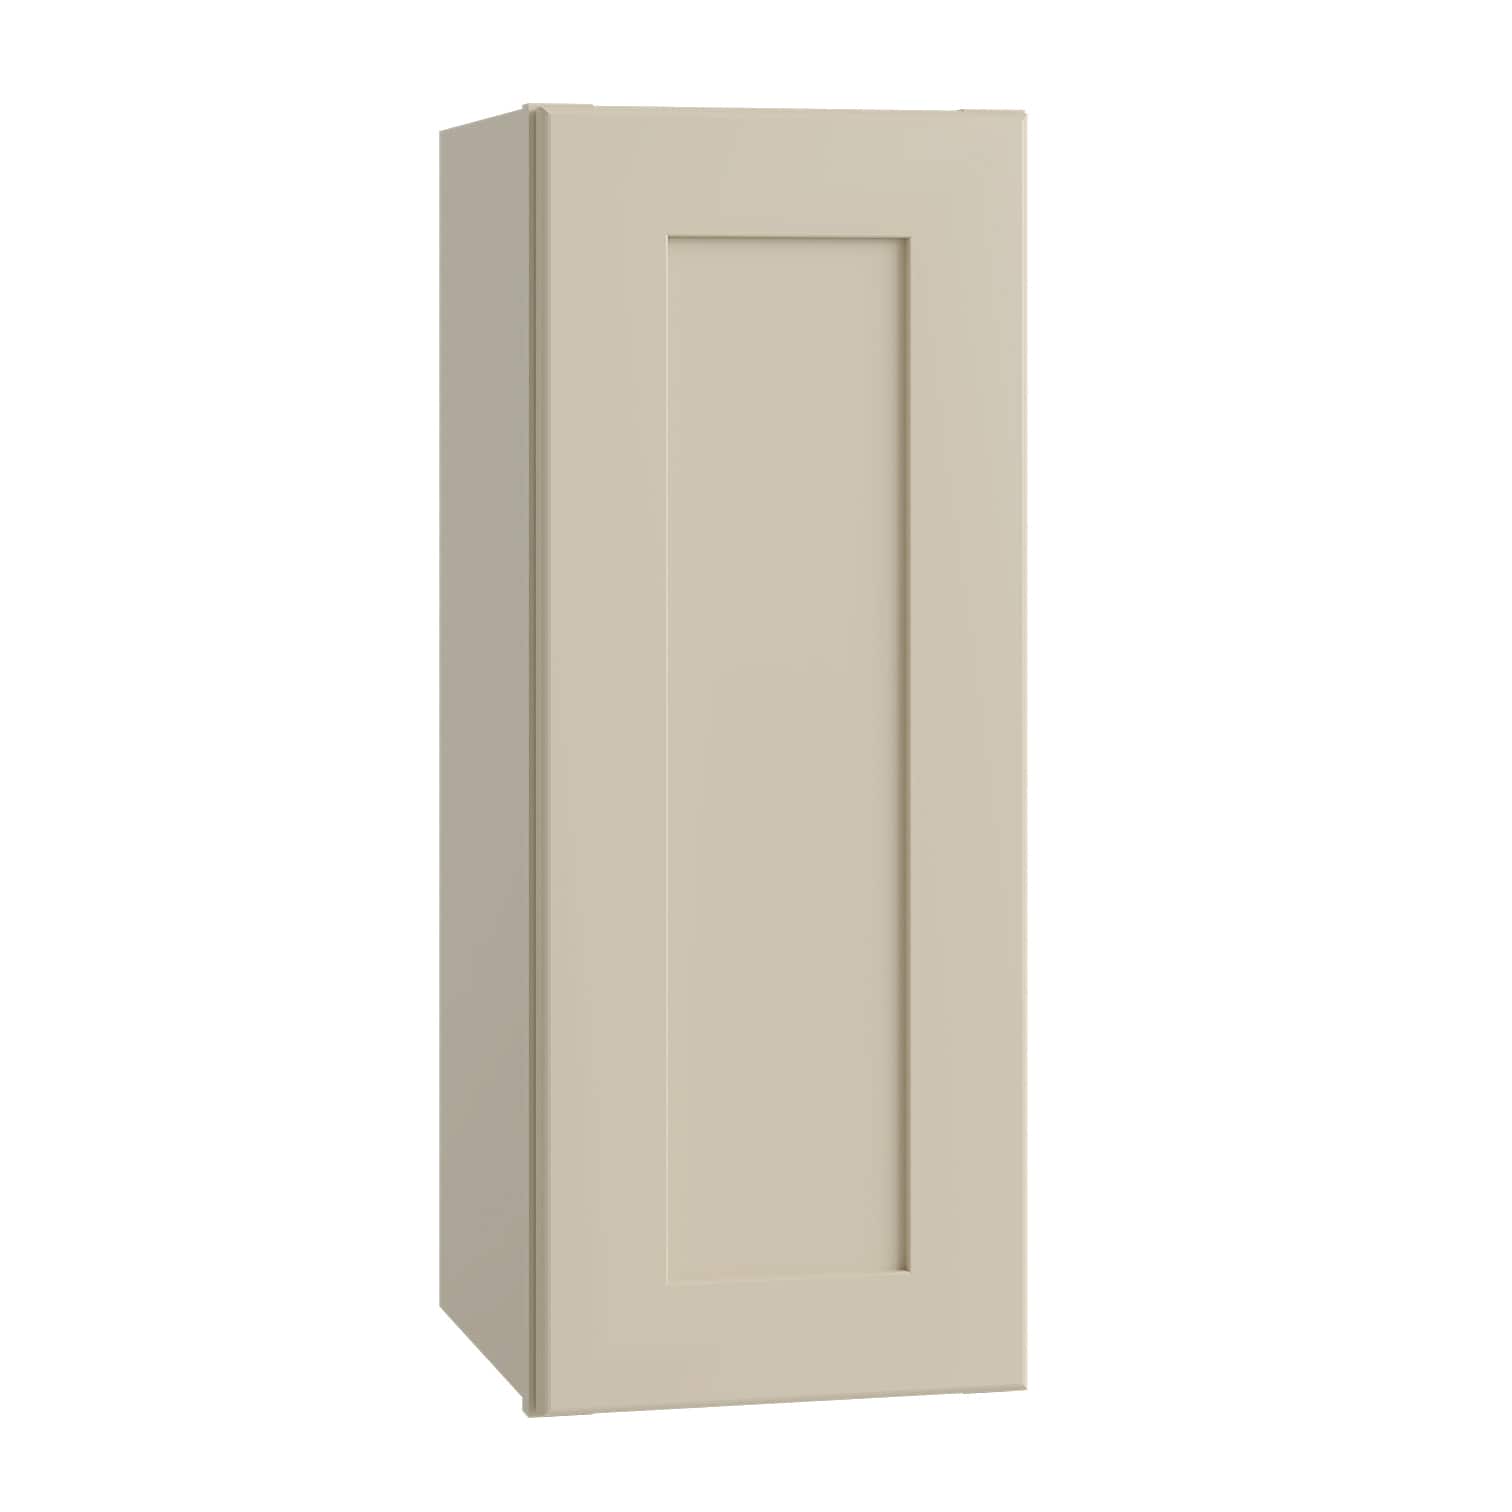 Luxxe Cabinetry 12-in W x 30-in H x 12-in D Norfolk Blended Cream Painted Door Wall Fully Assembled Semi-custom Cabinet in Off-White | W1230L-NBC